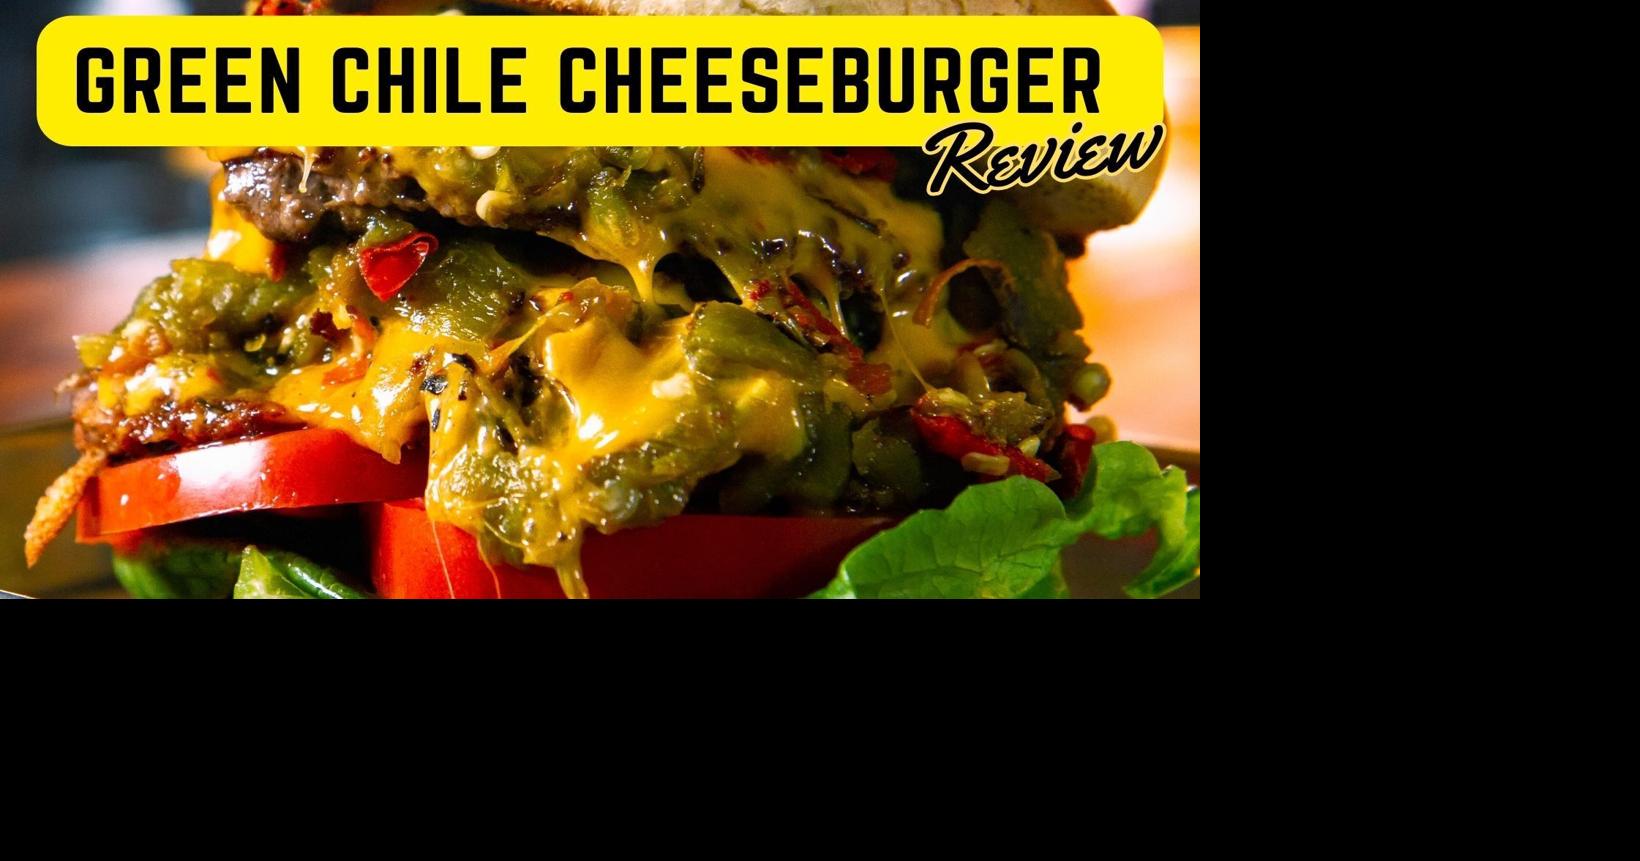 Albuquerque Isotopes to play as Green Chile Cheeseburgers